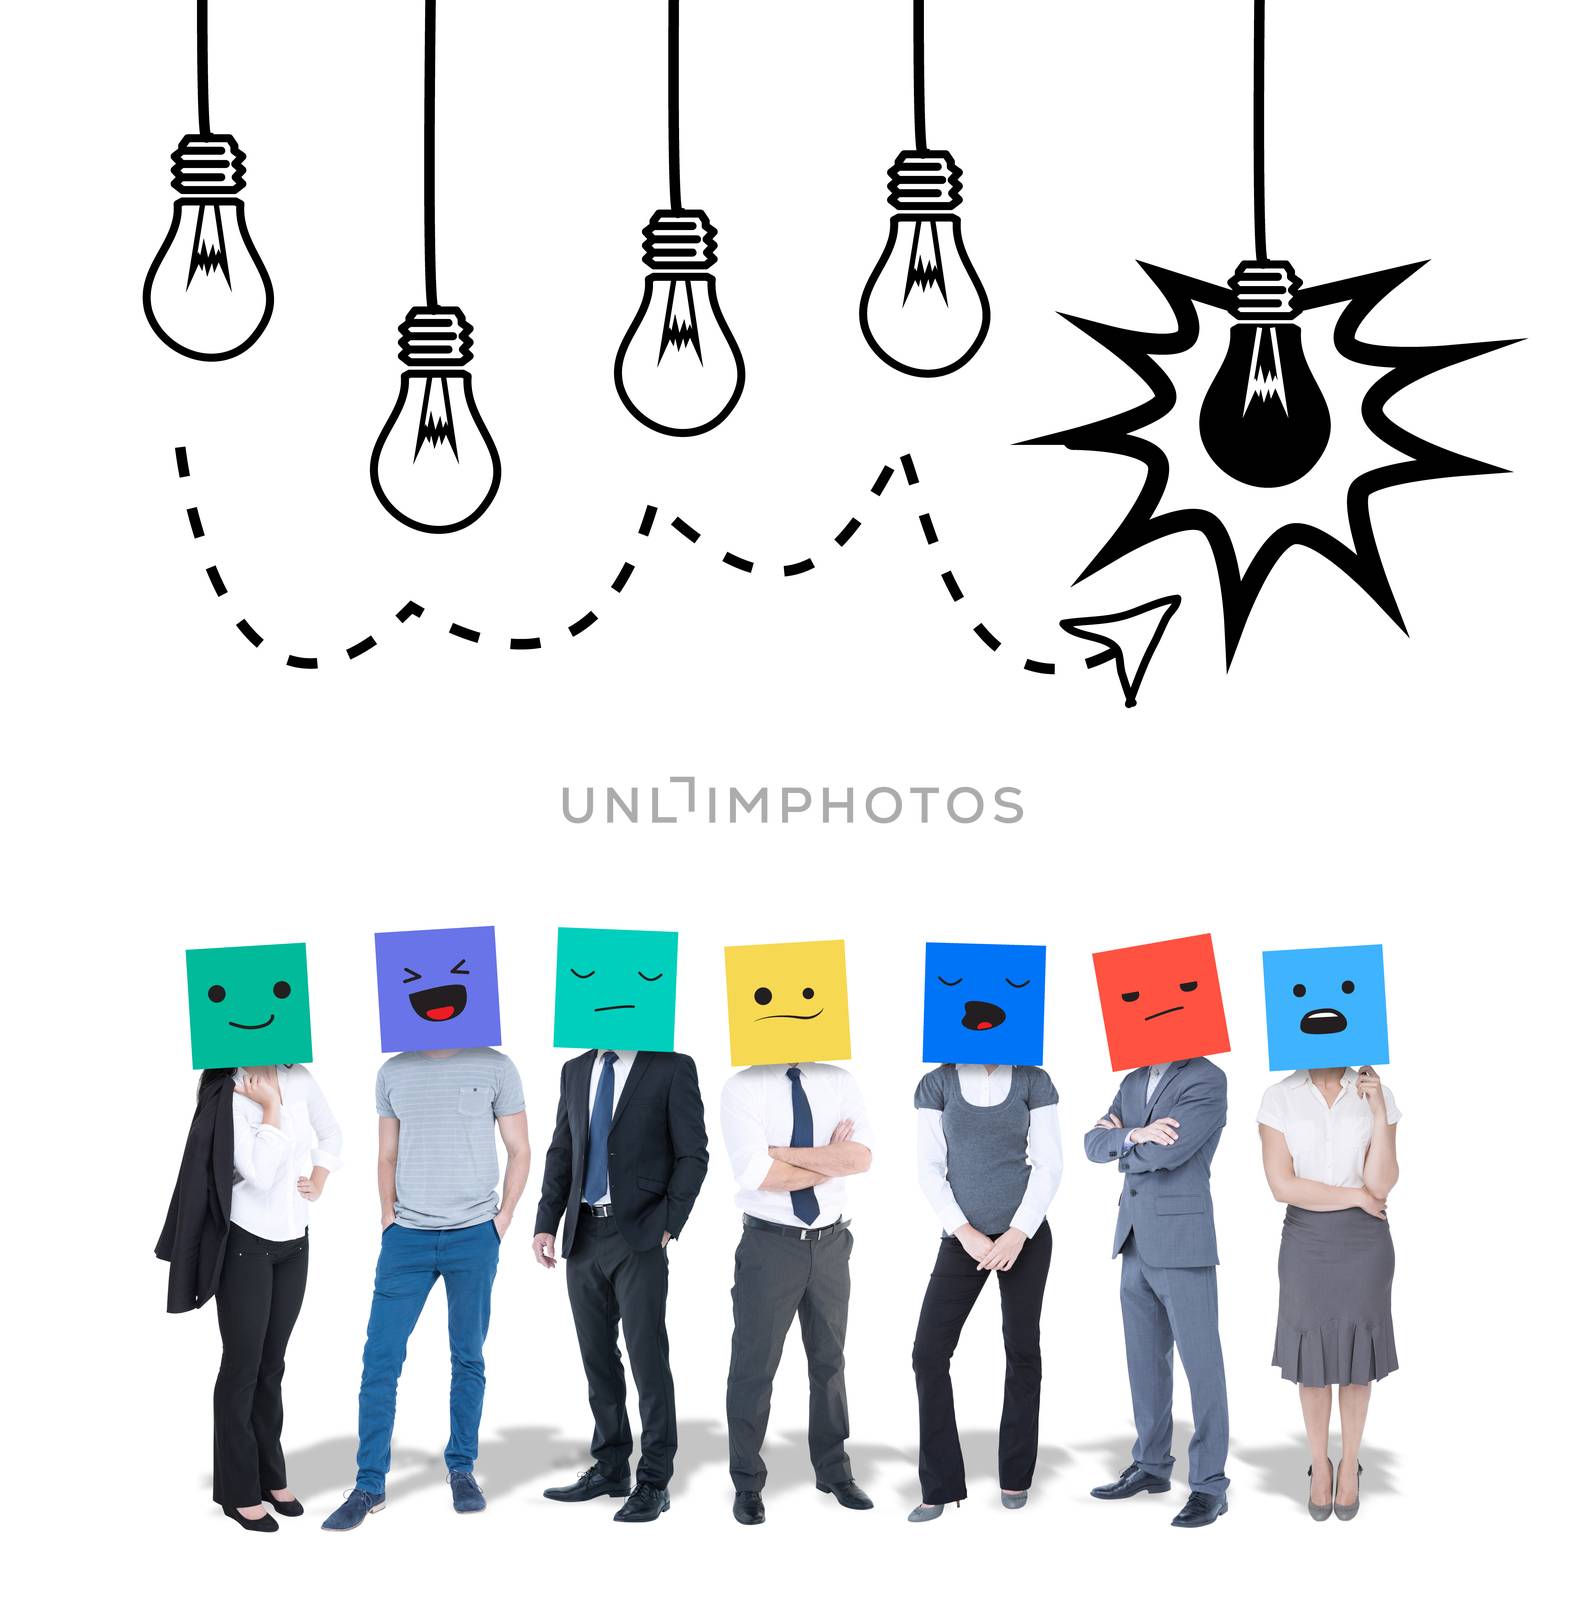 People with boxes on their heads against idea and innovation graphic